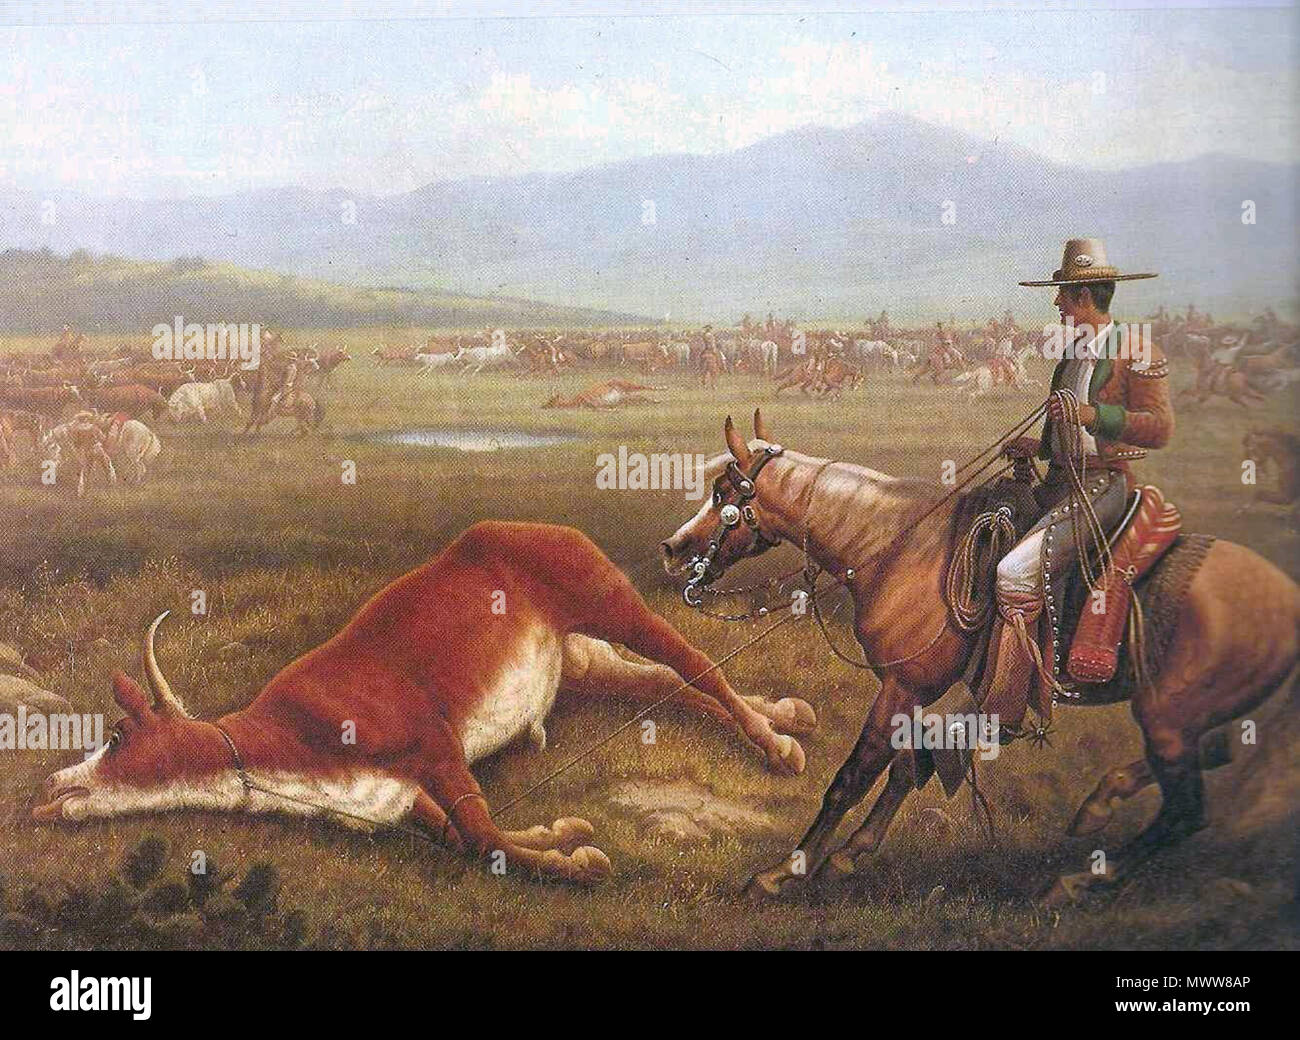 . English: Painting of a Vaquero in action roping cattle during 1830s Spanish California. 1830s. Time Life Books 626 Vaqueros Stock Photo